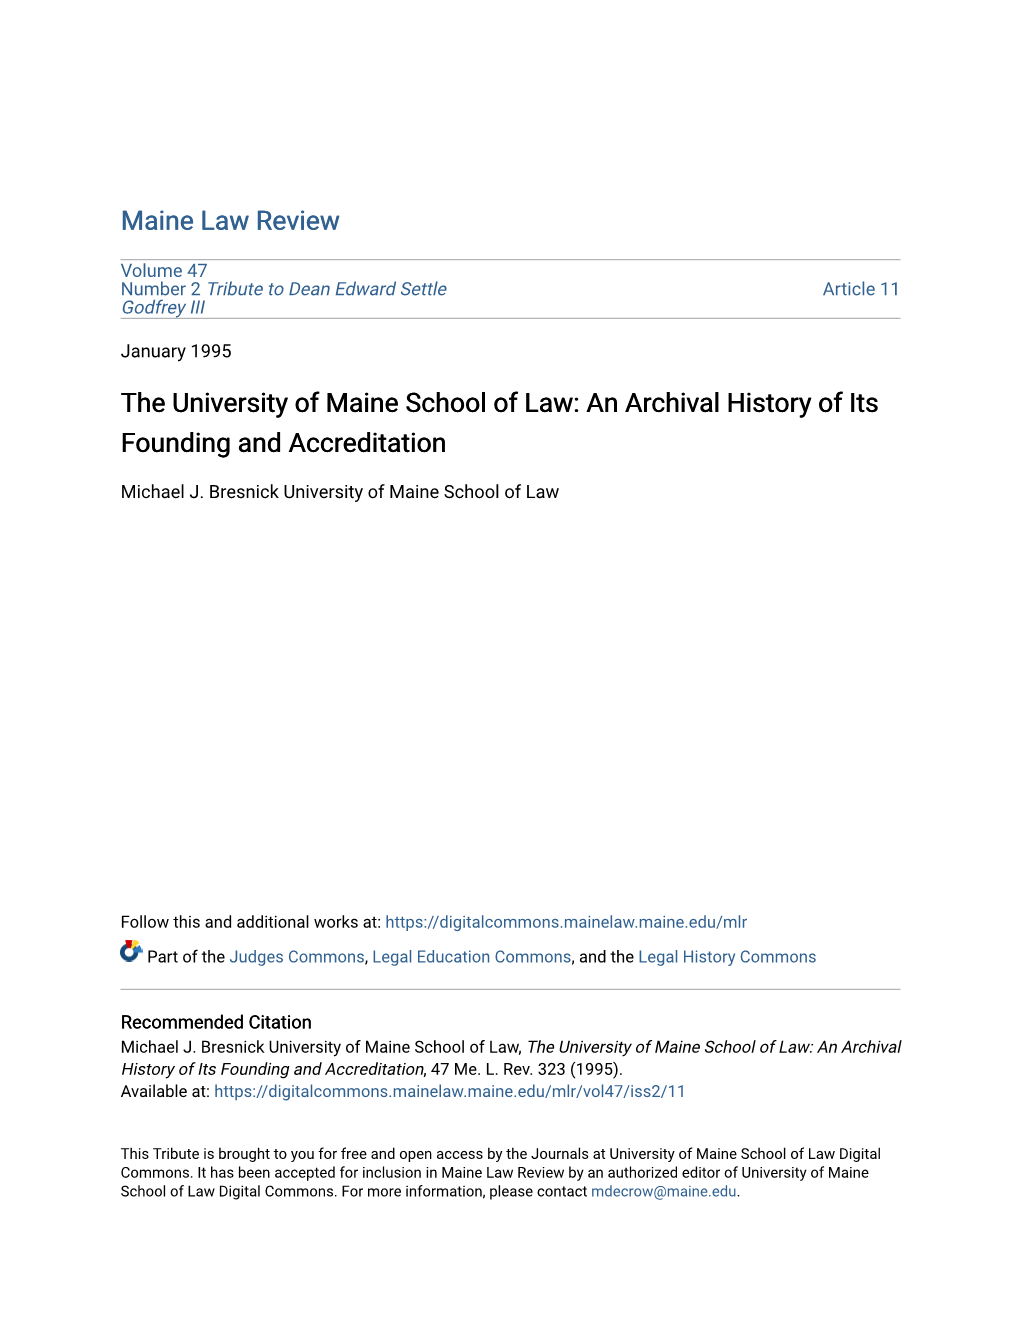 The University of Maine School of Law: an Archival History of Its Founding and Accreditation